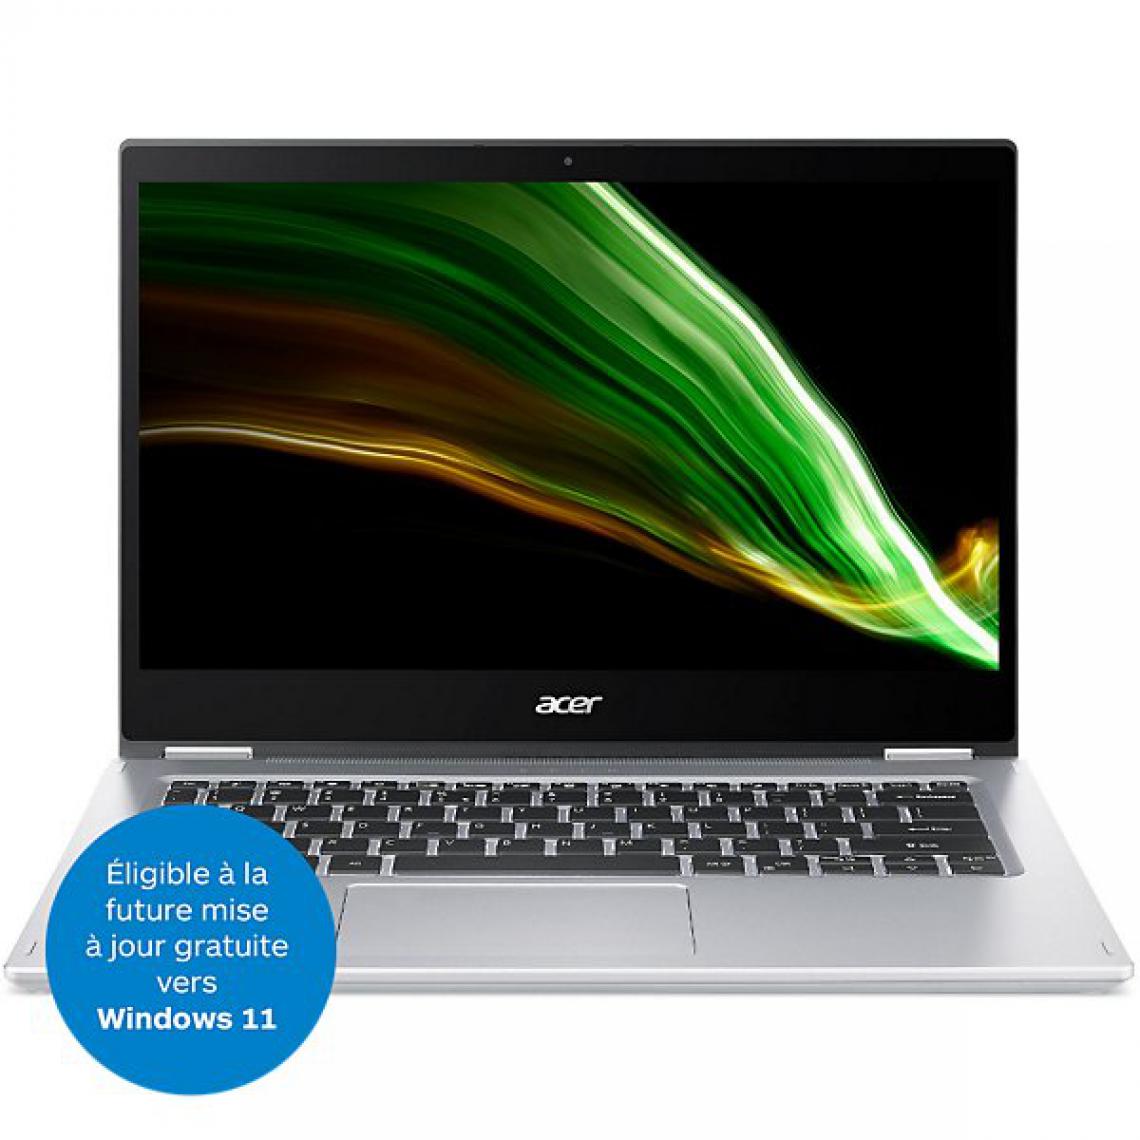 Acer - Spin SP114-31-P26B N6000 14p Spin SP114-31-P26B Intel Pentium Silver N6000 14p FHD Touch 4Go DDR4 eMMC 128Go Intel HD Graphics W10H in S mode 2Y - PC Portable